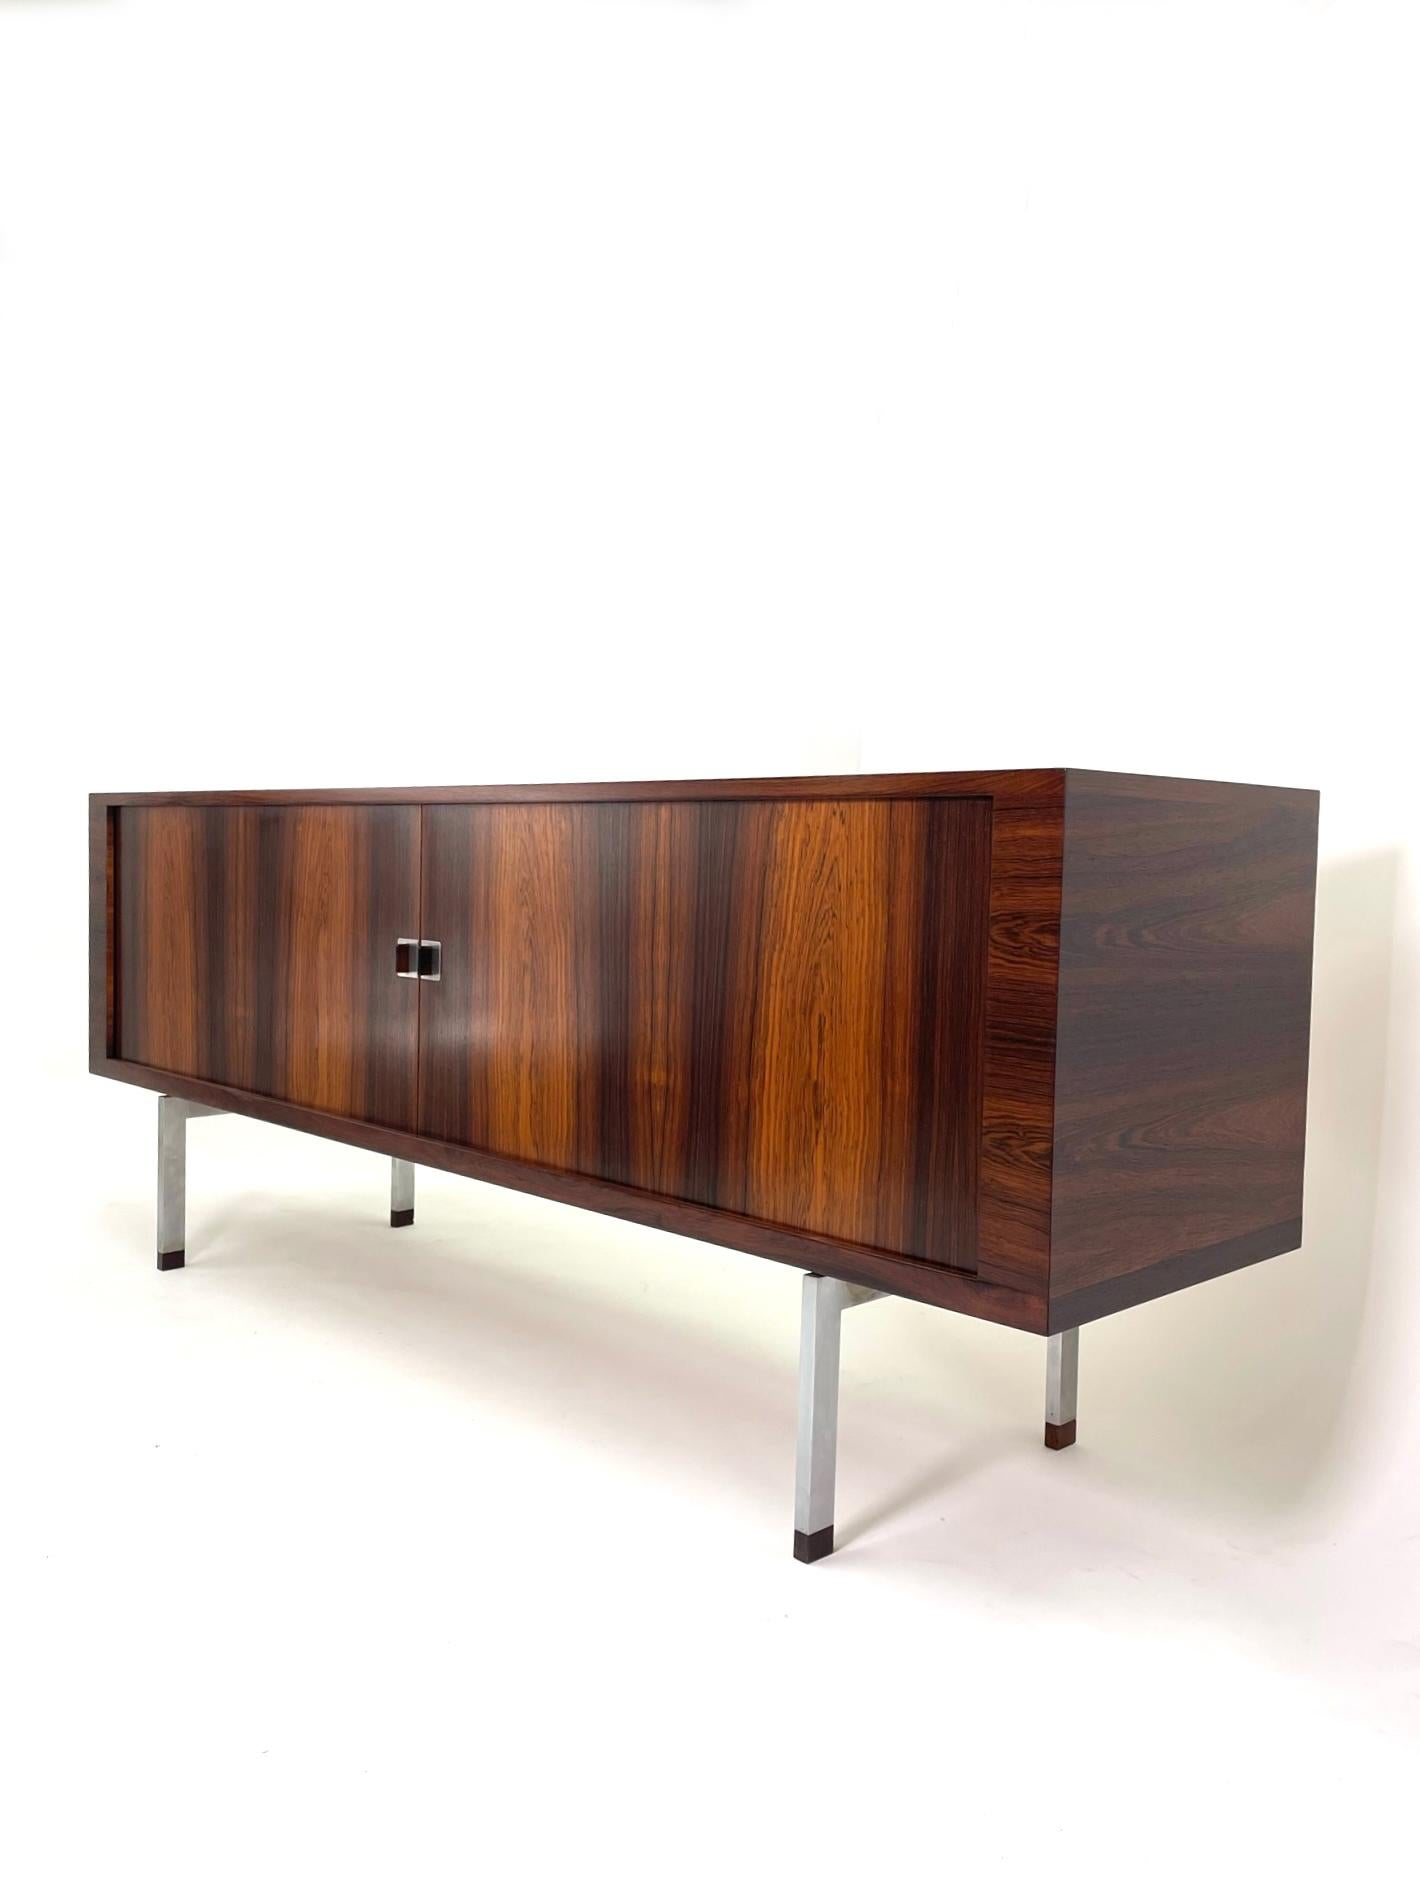 The rarest and most sophisticated cabinet designed by the master of Danish Modern design executed in Brazilian rosewood and white oak. This exquisite credenza sits on brushed stainless steel legs that are capped in solid rosewood. This is the caviar